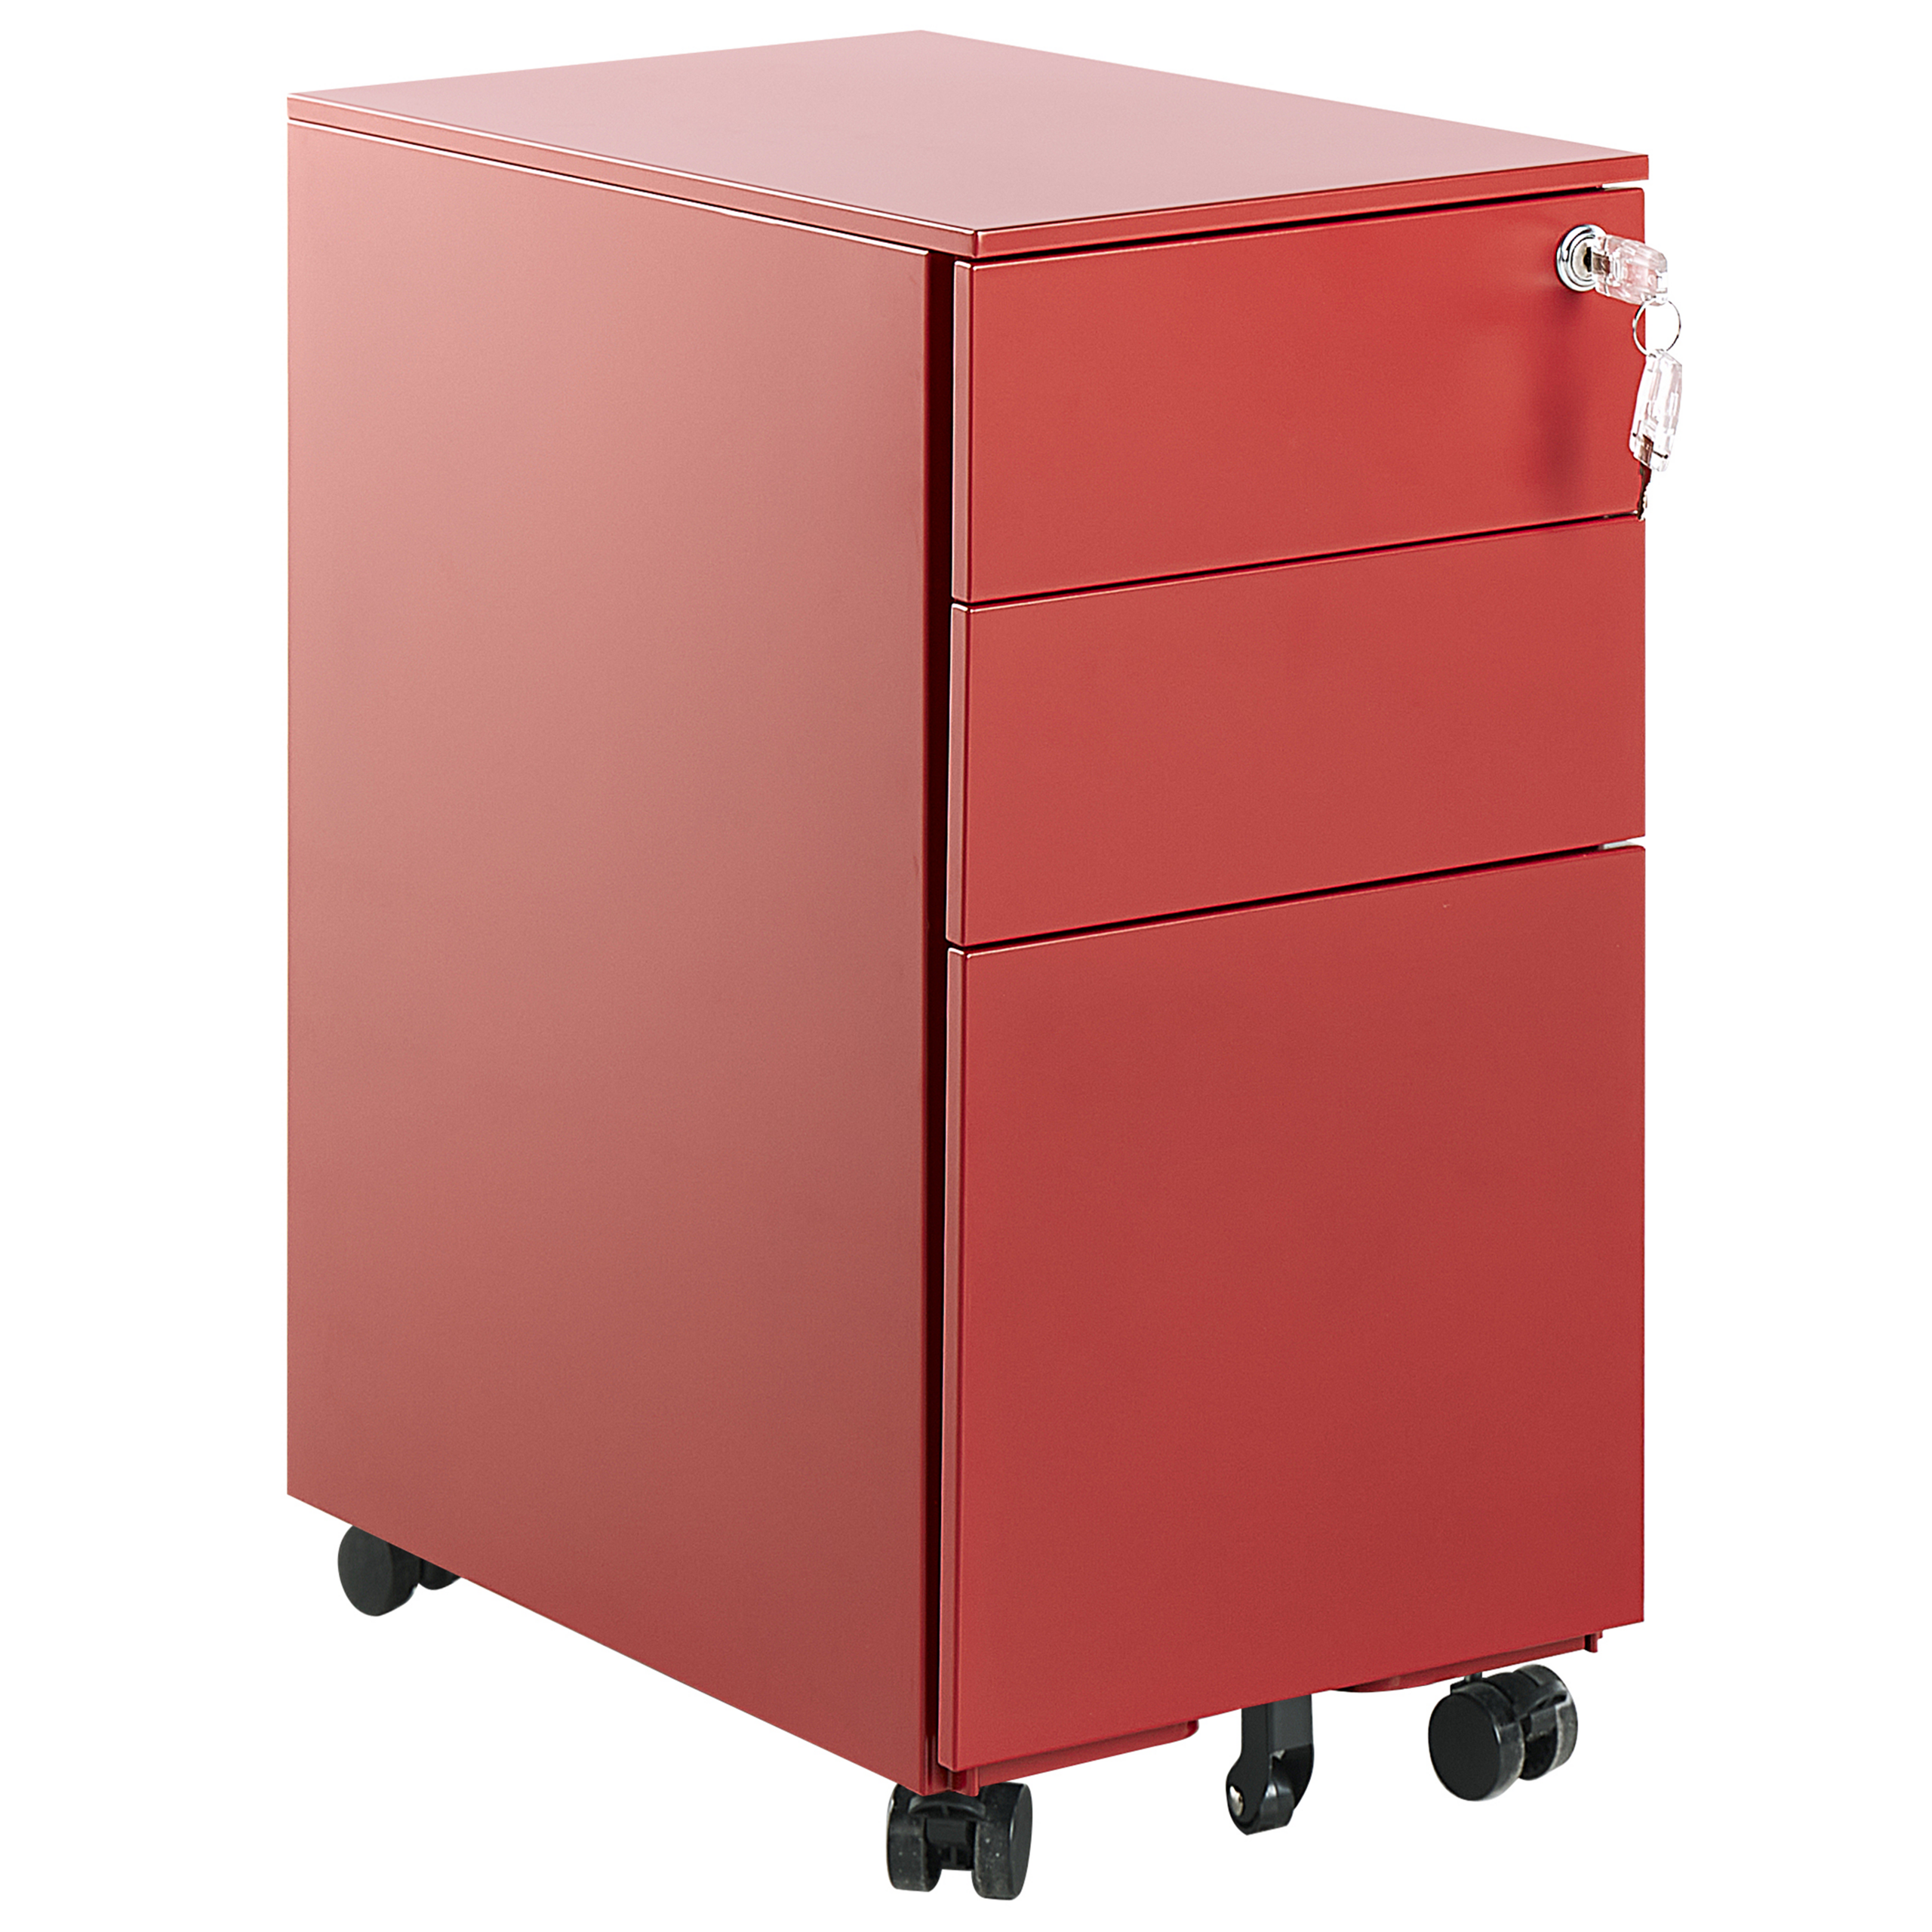 Beliani Storage Cabinet Red Metal with 3 Drawers Key Lock Castors Industrial Modern Home Office Garage Material:Metal Size:50x60x30